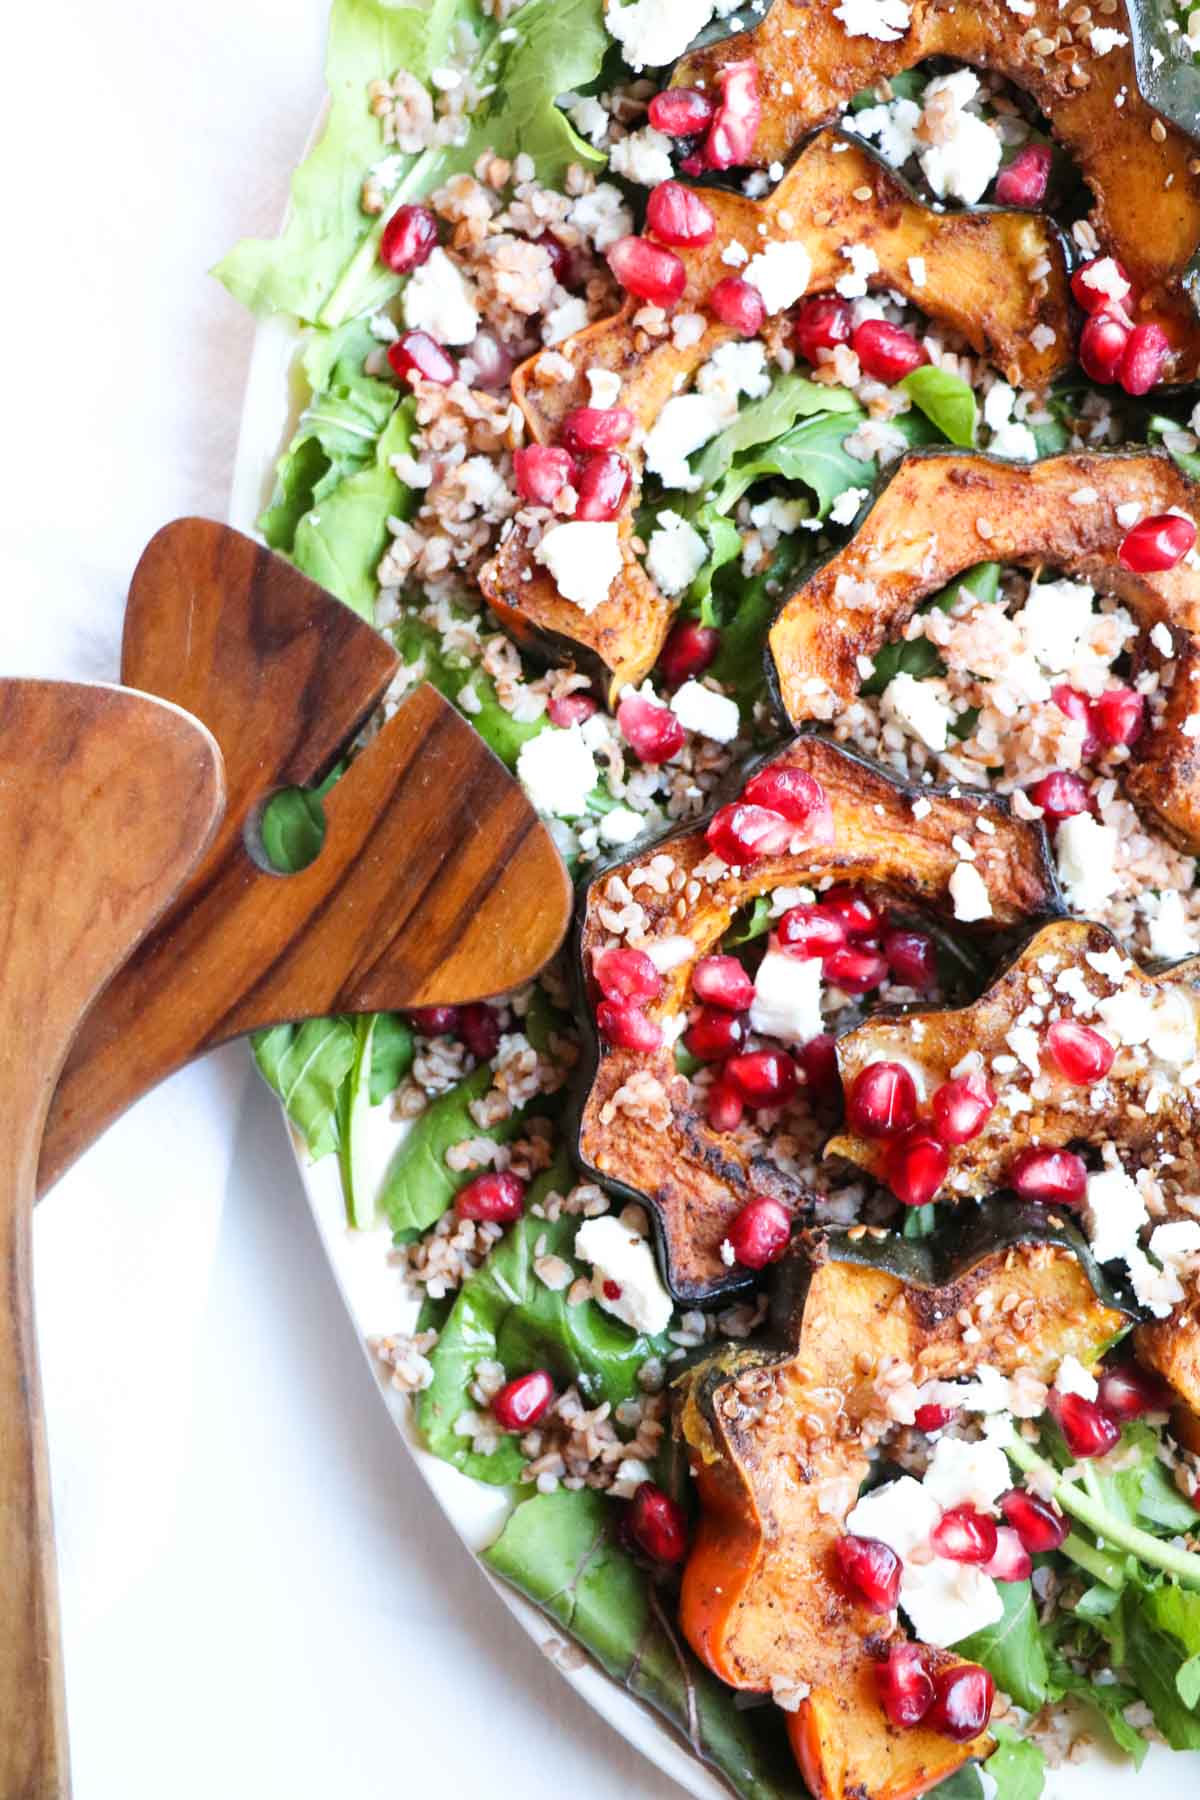 This festive (gluten free) Roasted Acorn Squash Salad with warm Buckwheat, Five-Spice Acorn Squash, Feta Cheese, and Pomegranate Seeds is full of healthy seasonal ingredients and a sweet and tangy maple dijon dressing. Yum! |Abraskitchen.com